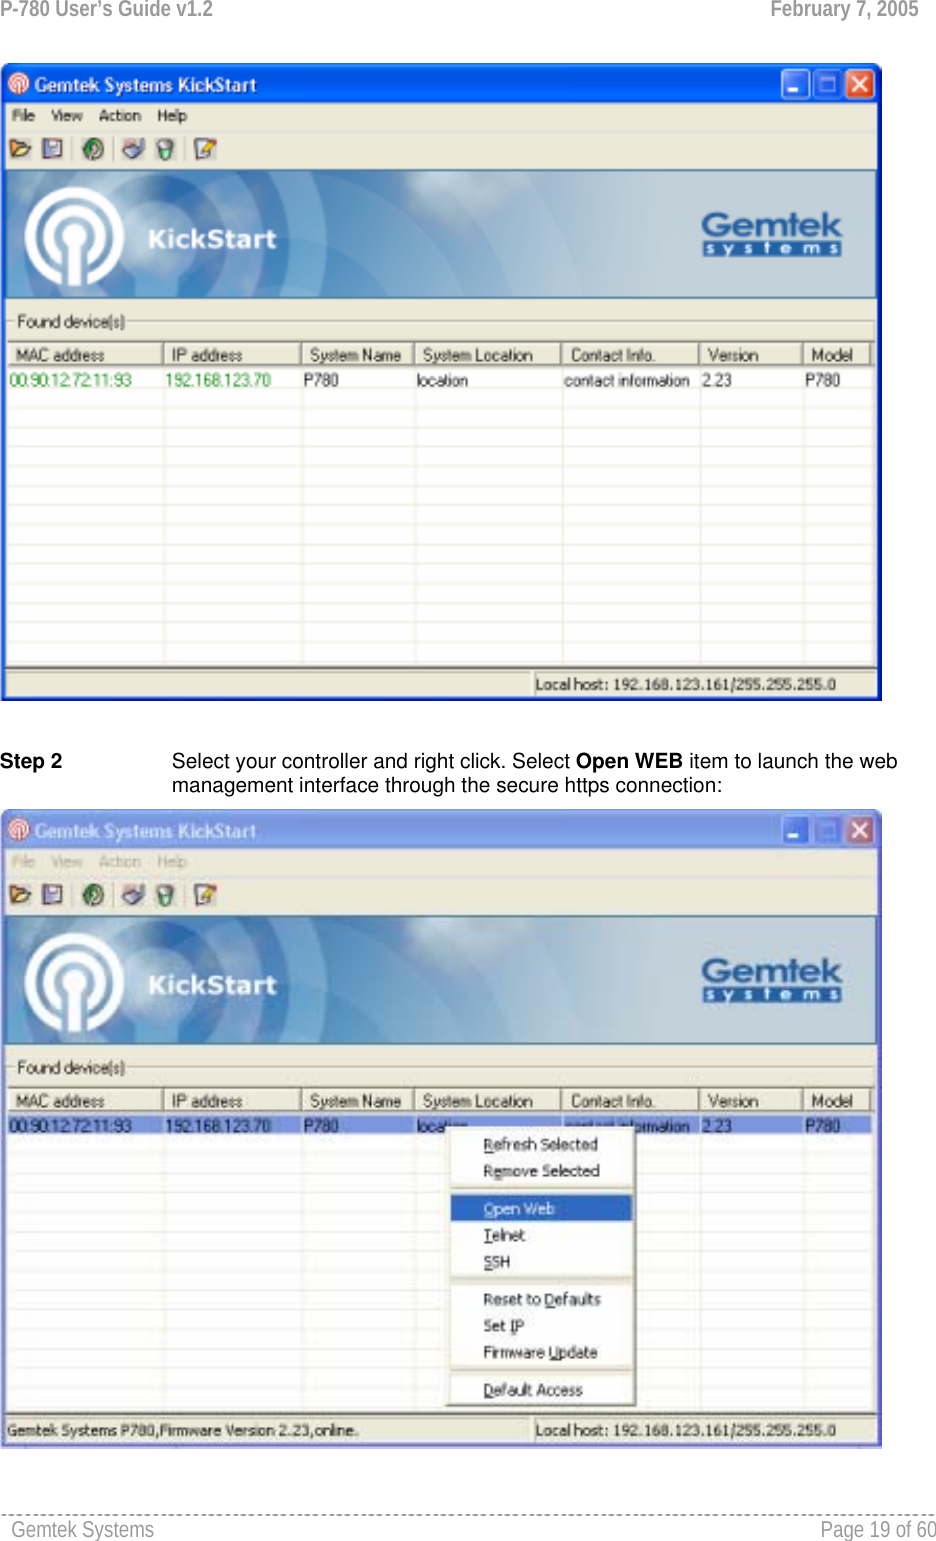 P-780 User’s Guide v1.2  February 7, 2005 Gemtek Systems    Page 19 of 60     Step 2   Select your controller and right click. Select Open WEB item to launch the web management interface through the secure https connection:   